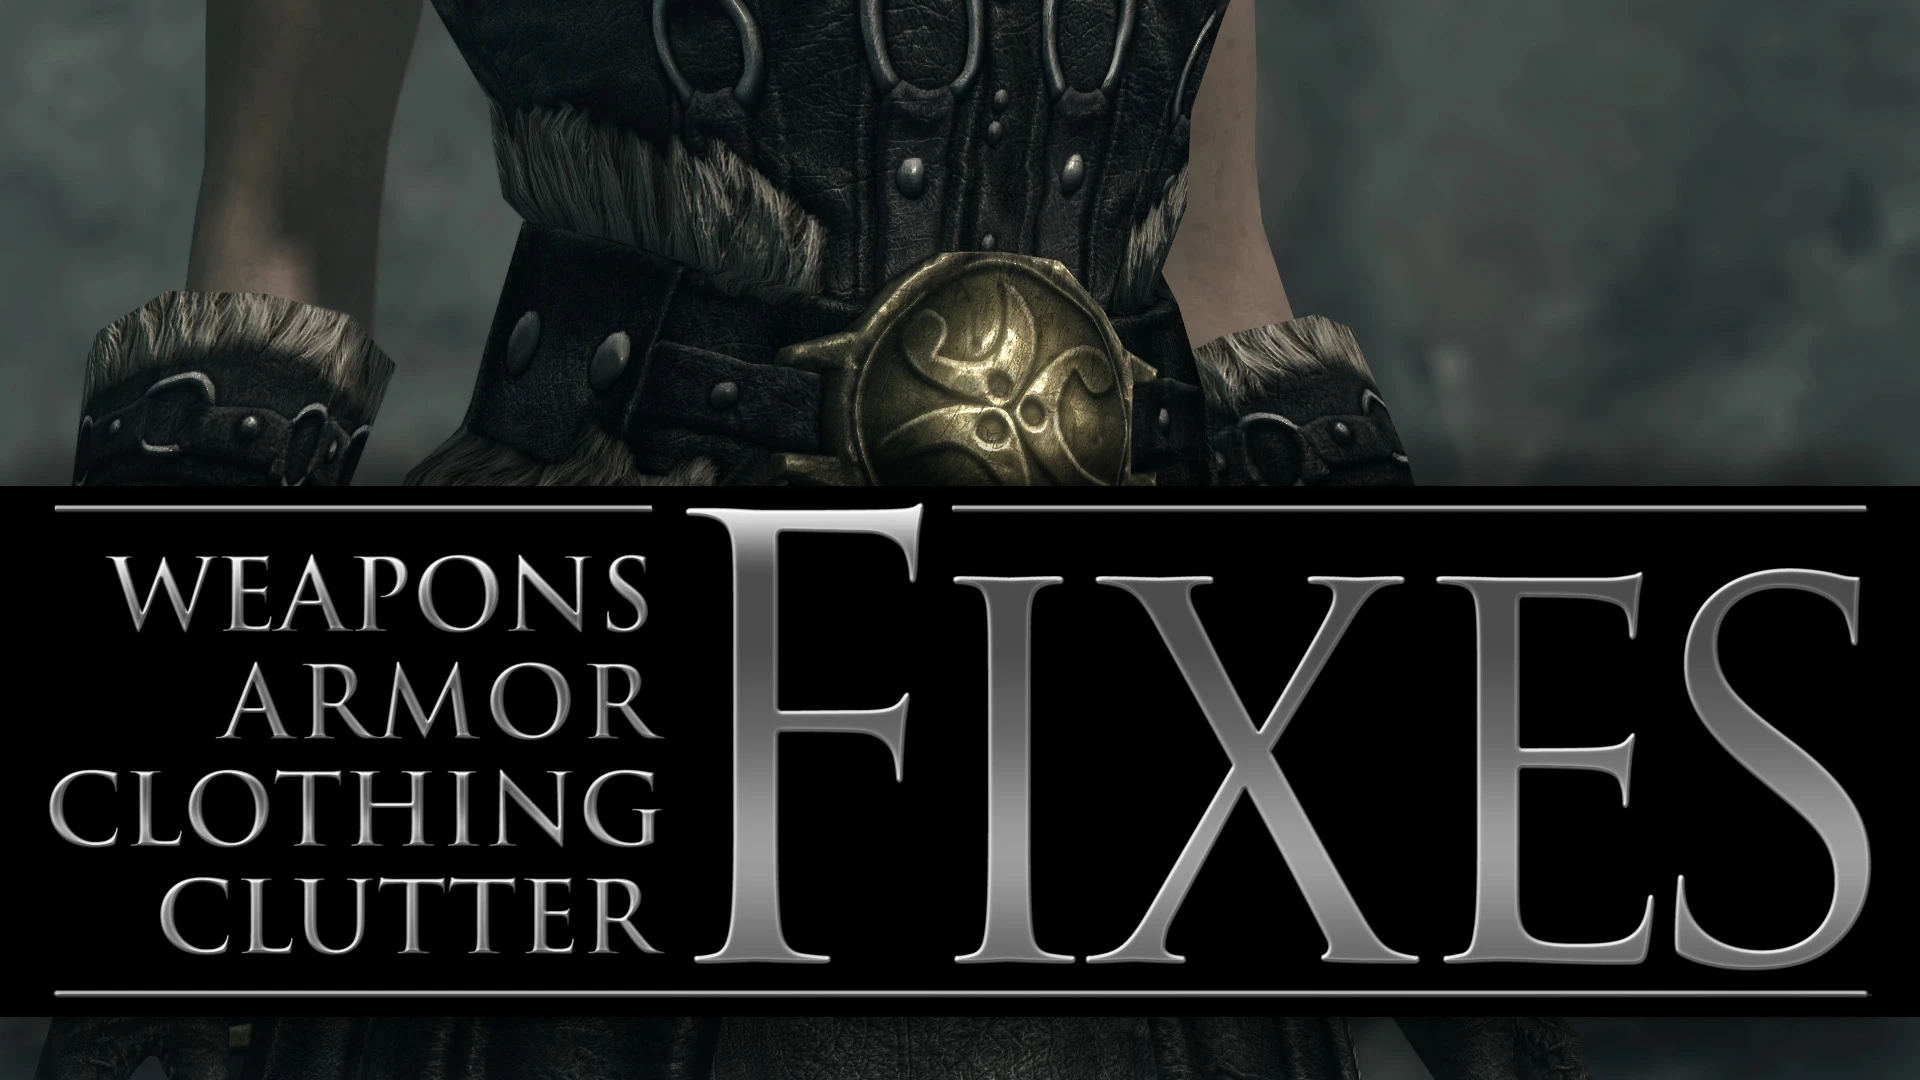 Armor fixes. Clothing and clutter Fixes. The Fix. Fixes.